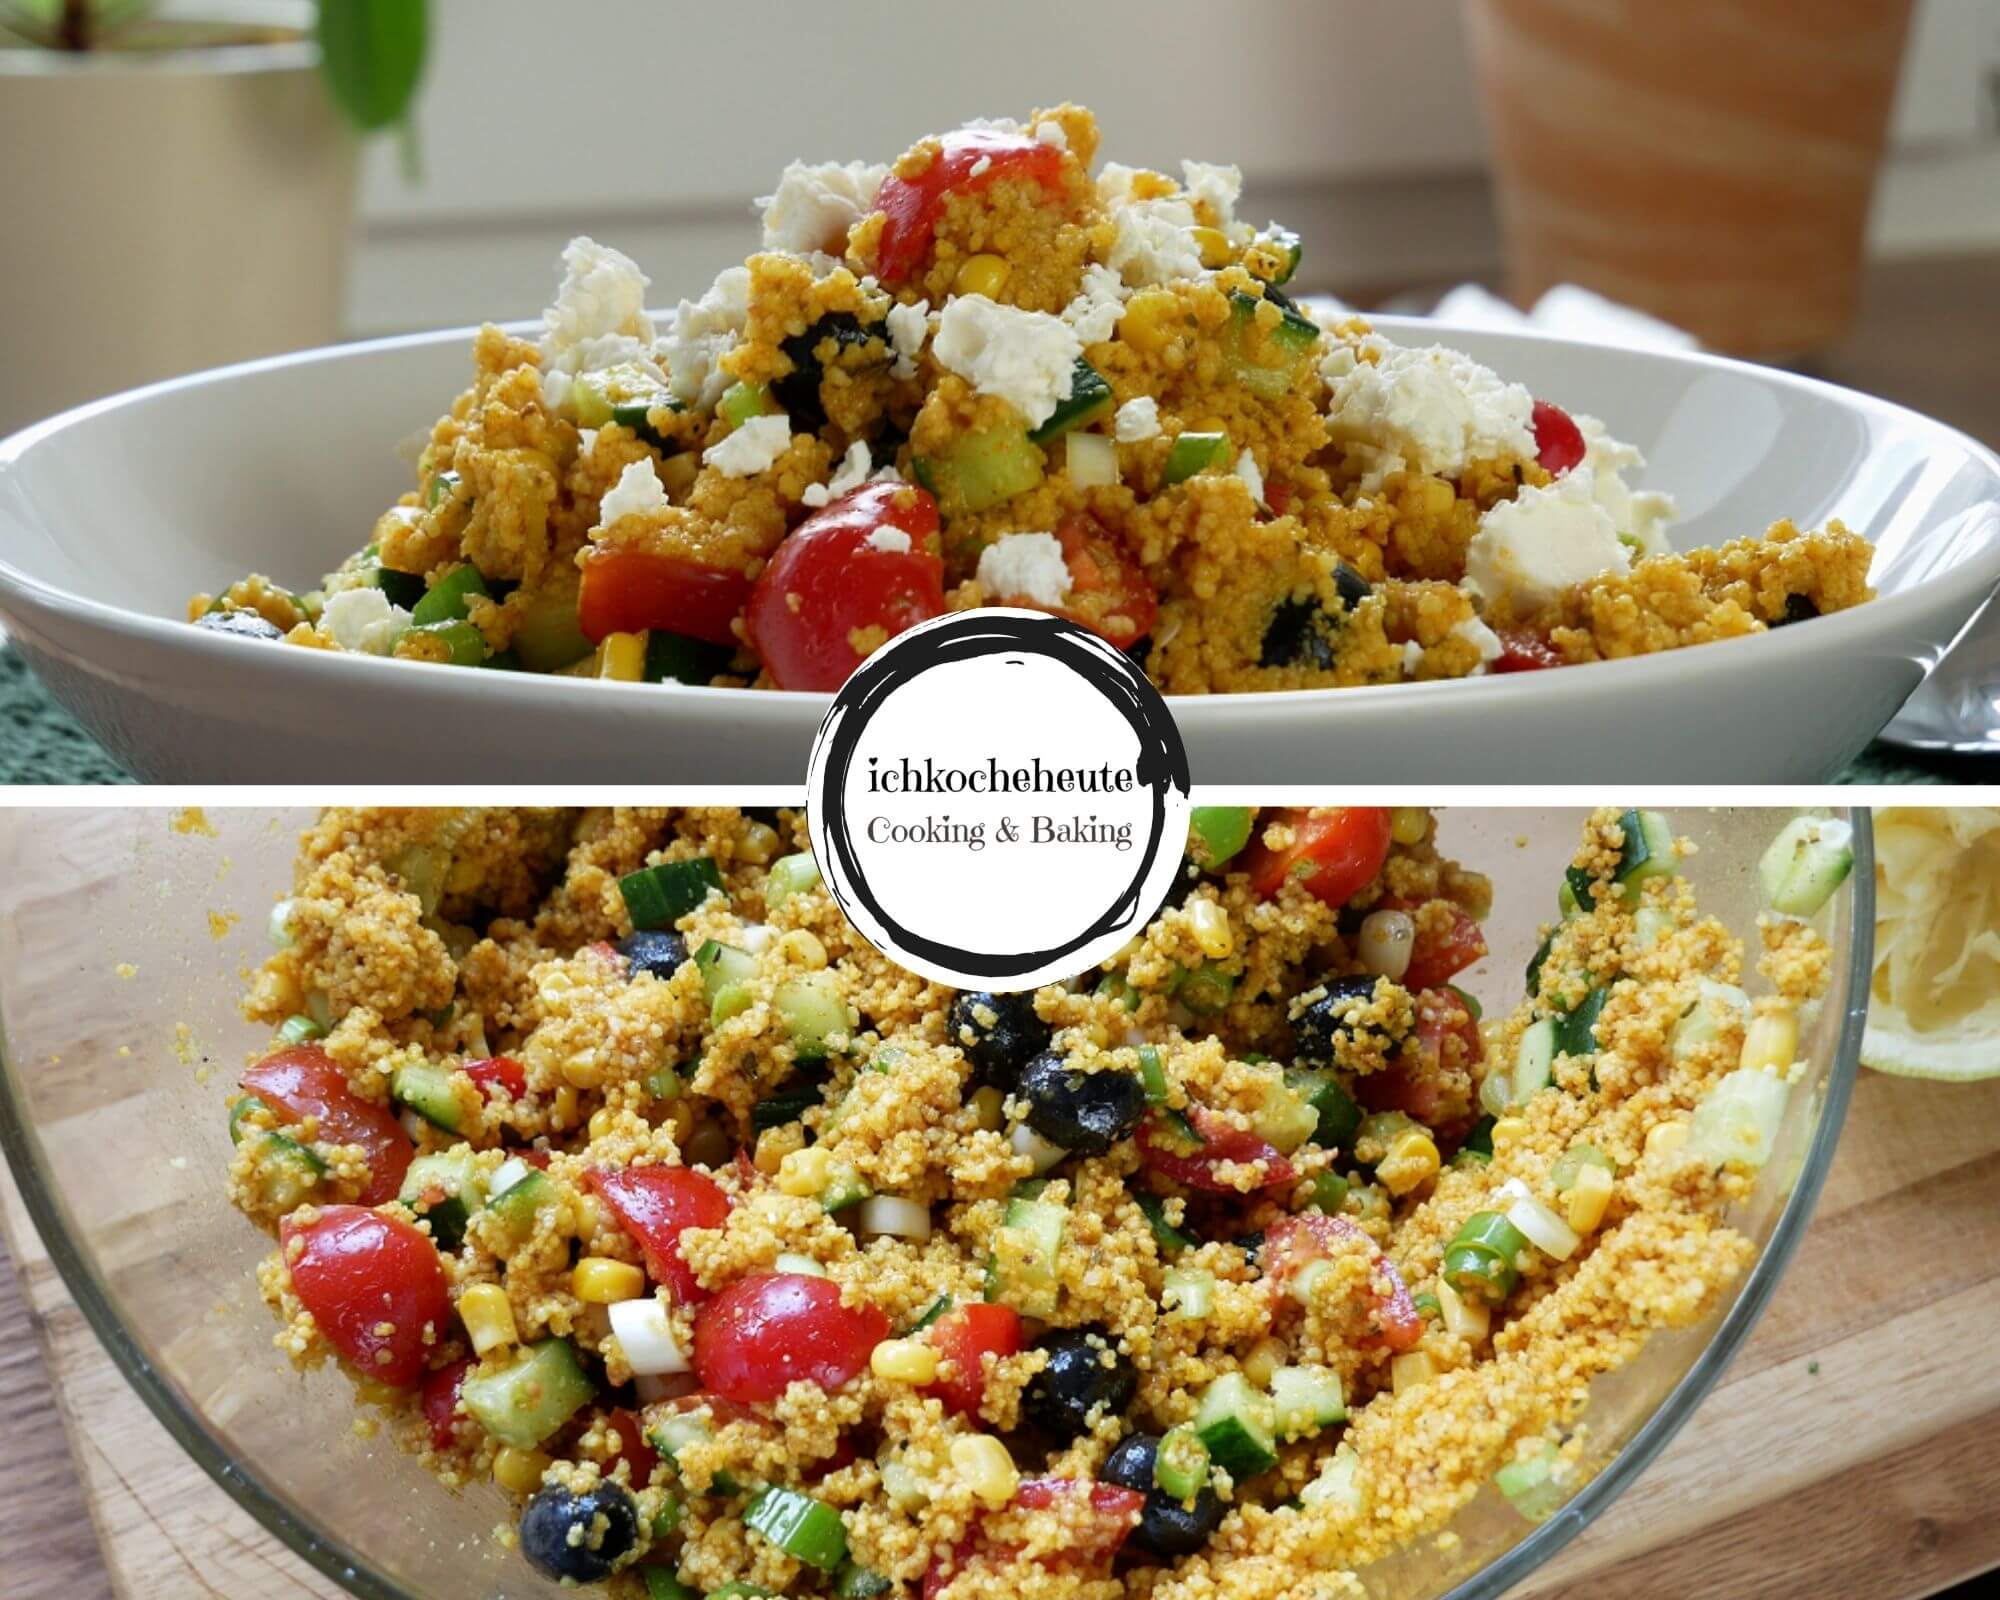 Serving Couscous Salad with Veggies & Feta Cheese